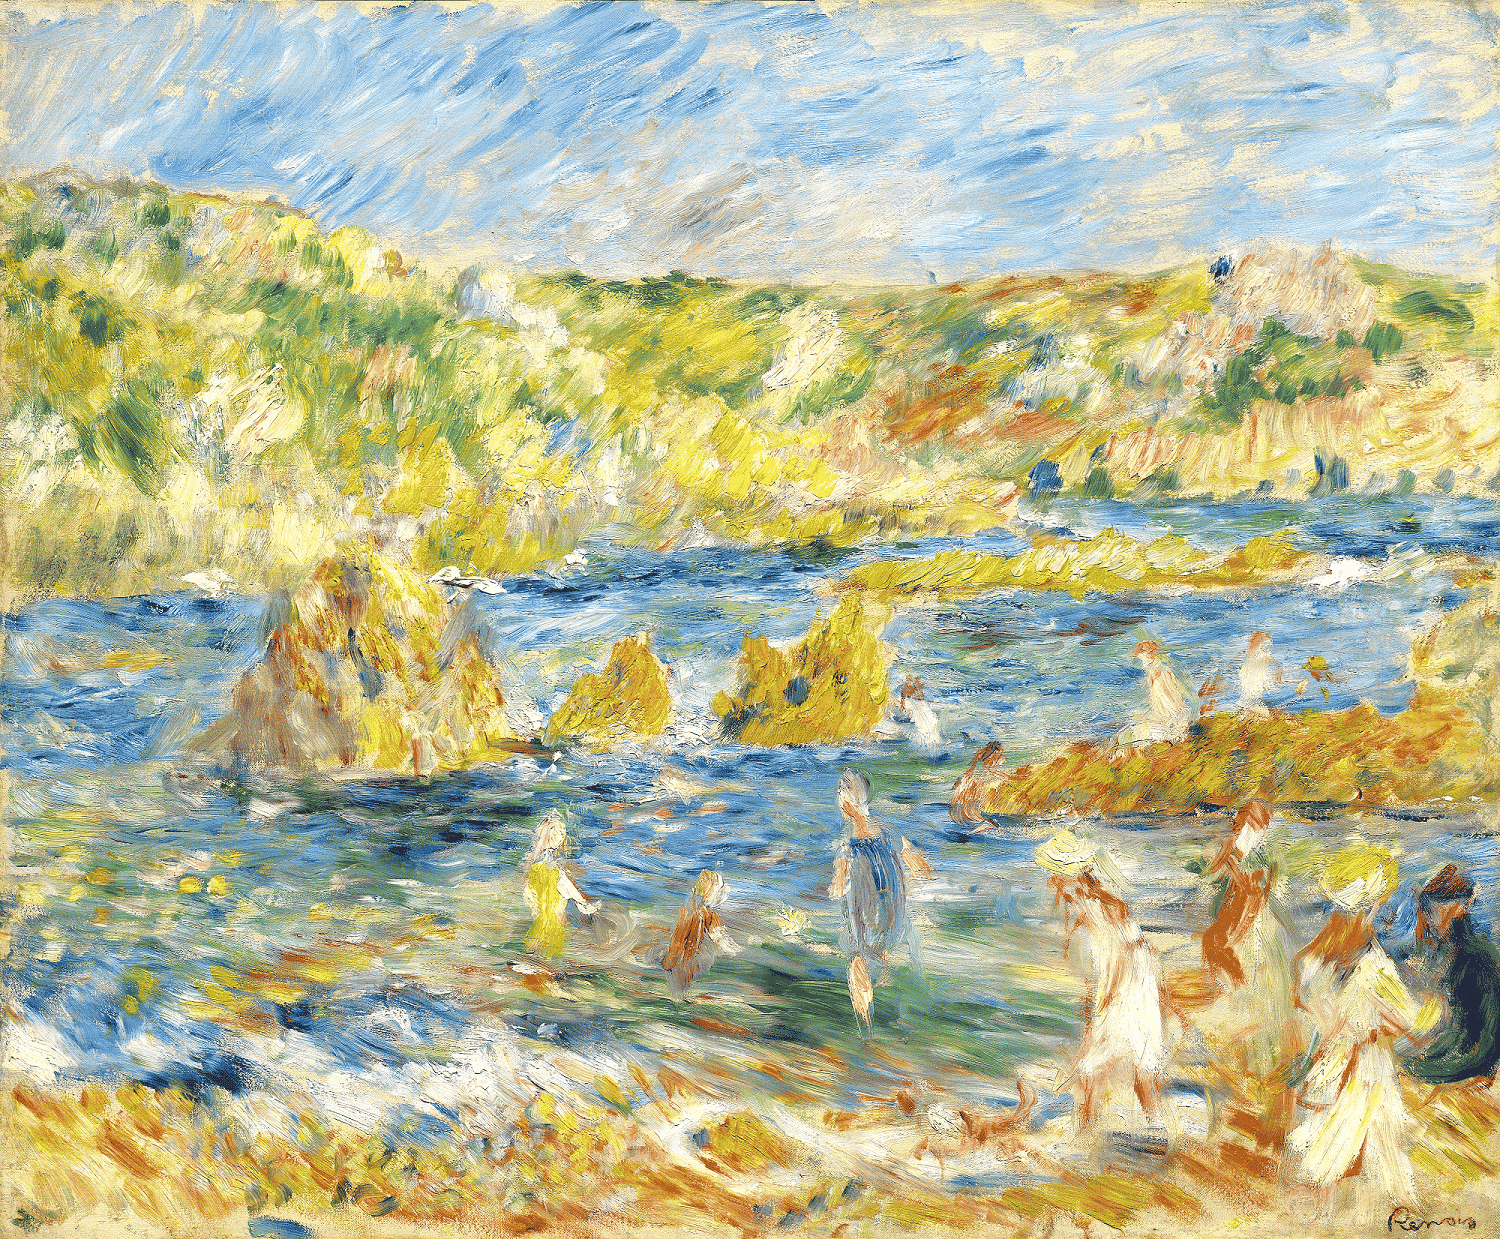 Renoir in Guernsey, 1883 exhibition museum Giverny